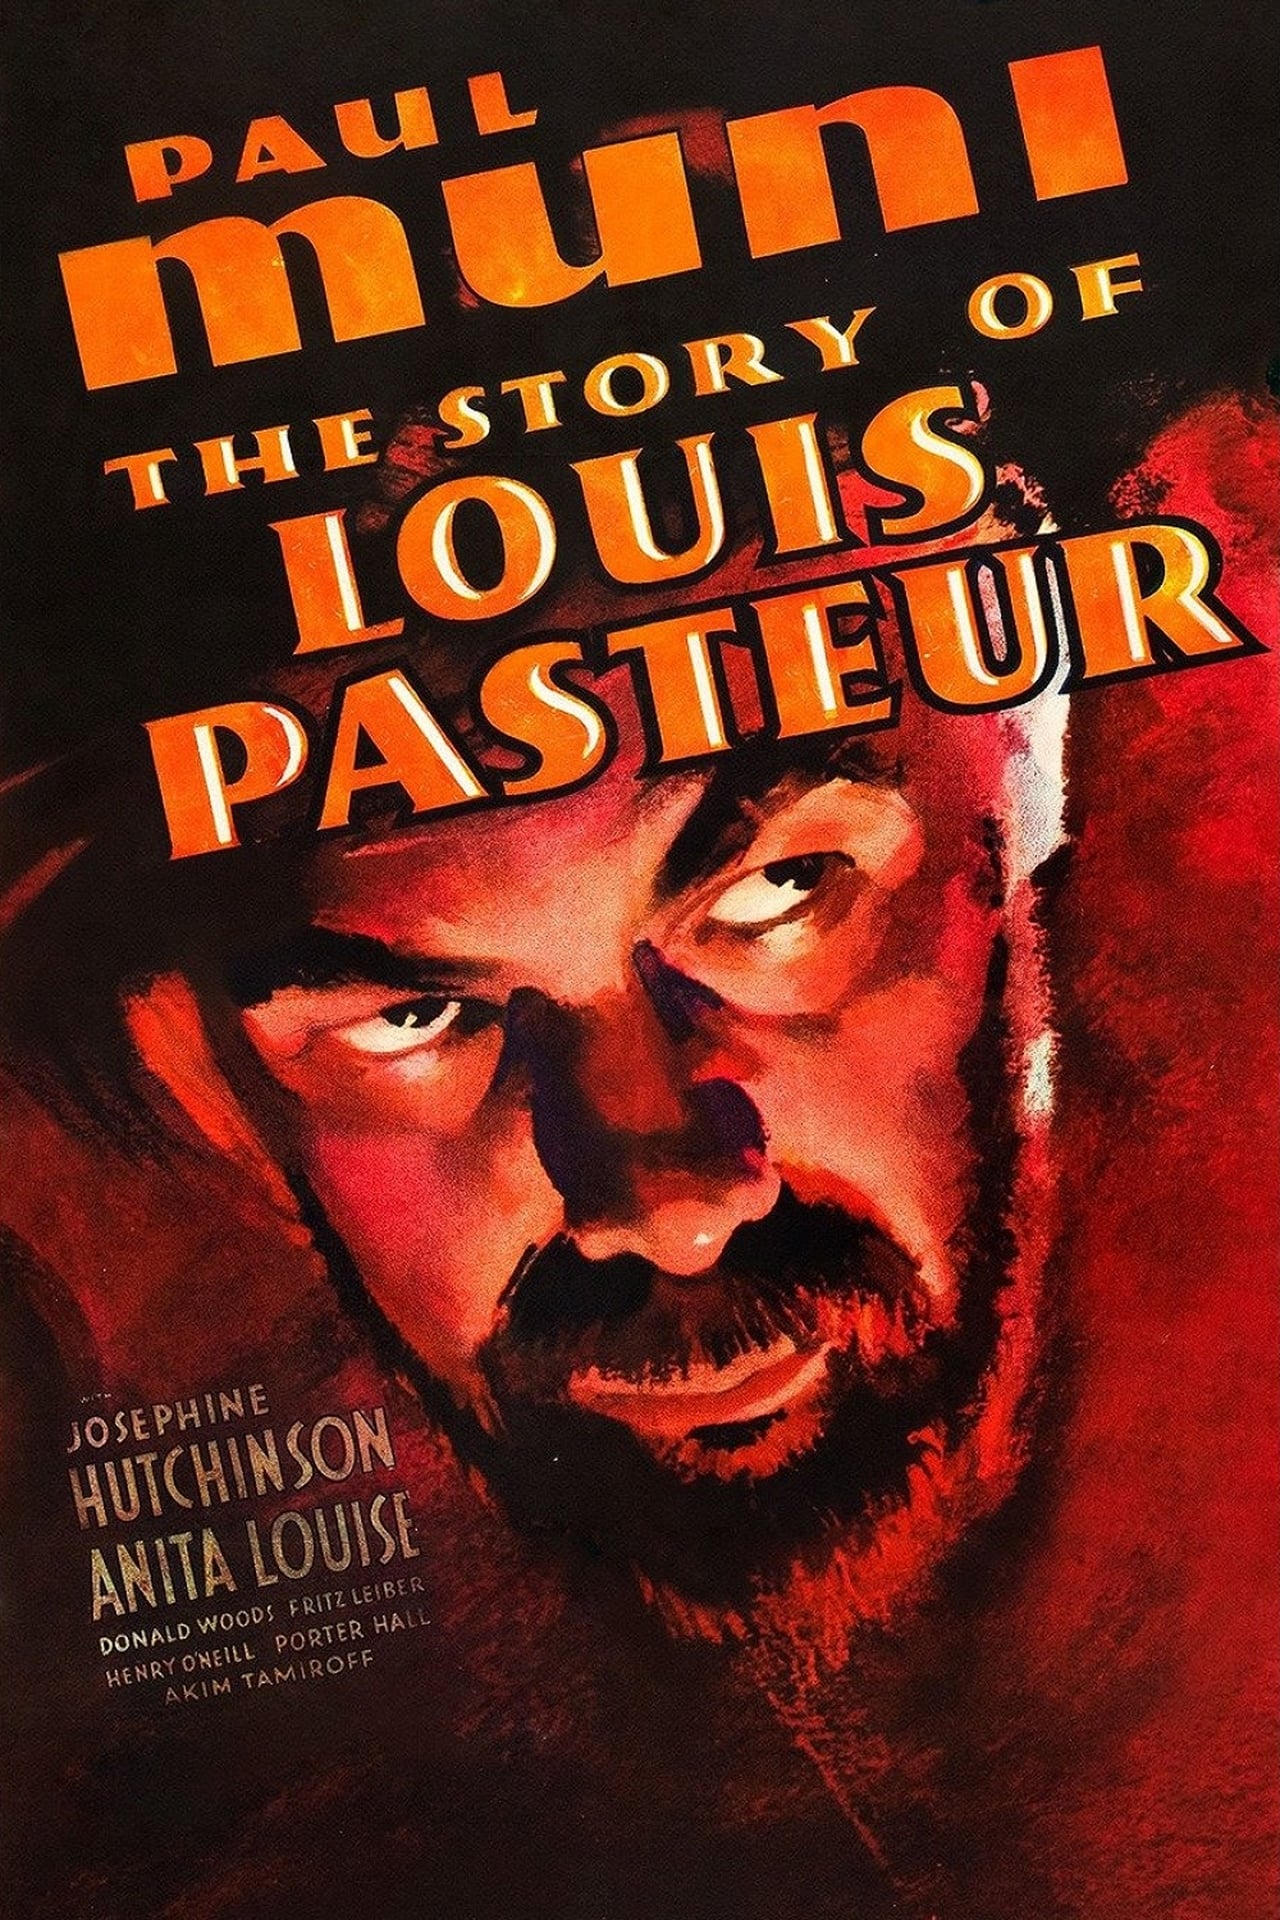 The Story Of Louis Pasteur (1936)